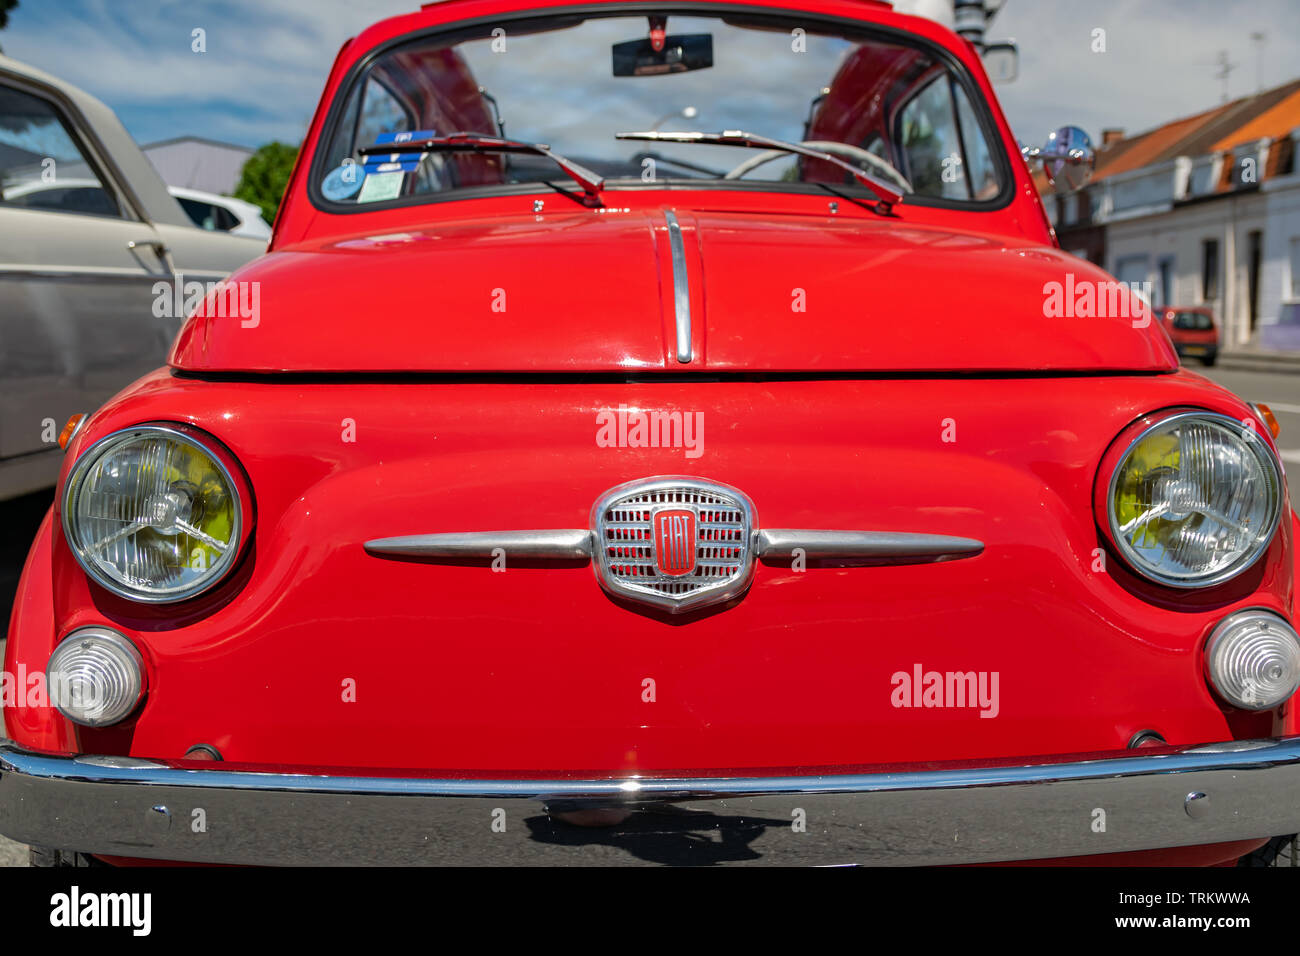 Wattrelos,FRANCE-June 02,2019: front view of the red Fiat Nuova 500,car exhibited at the 7th Retro Car Festival at the Renault Wattrelos ZI Martinoire. Stock Photo